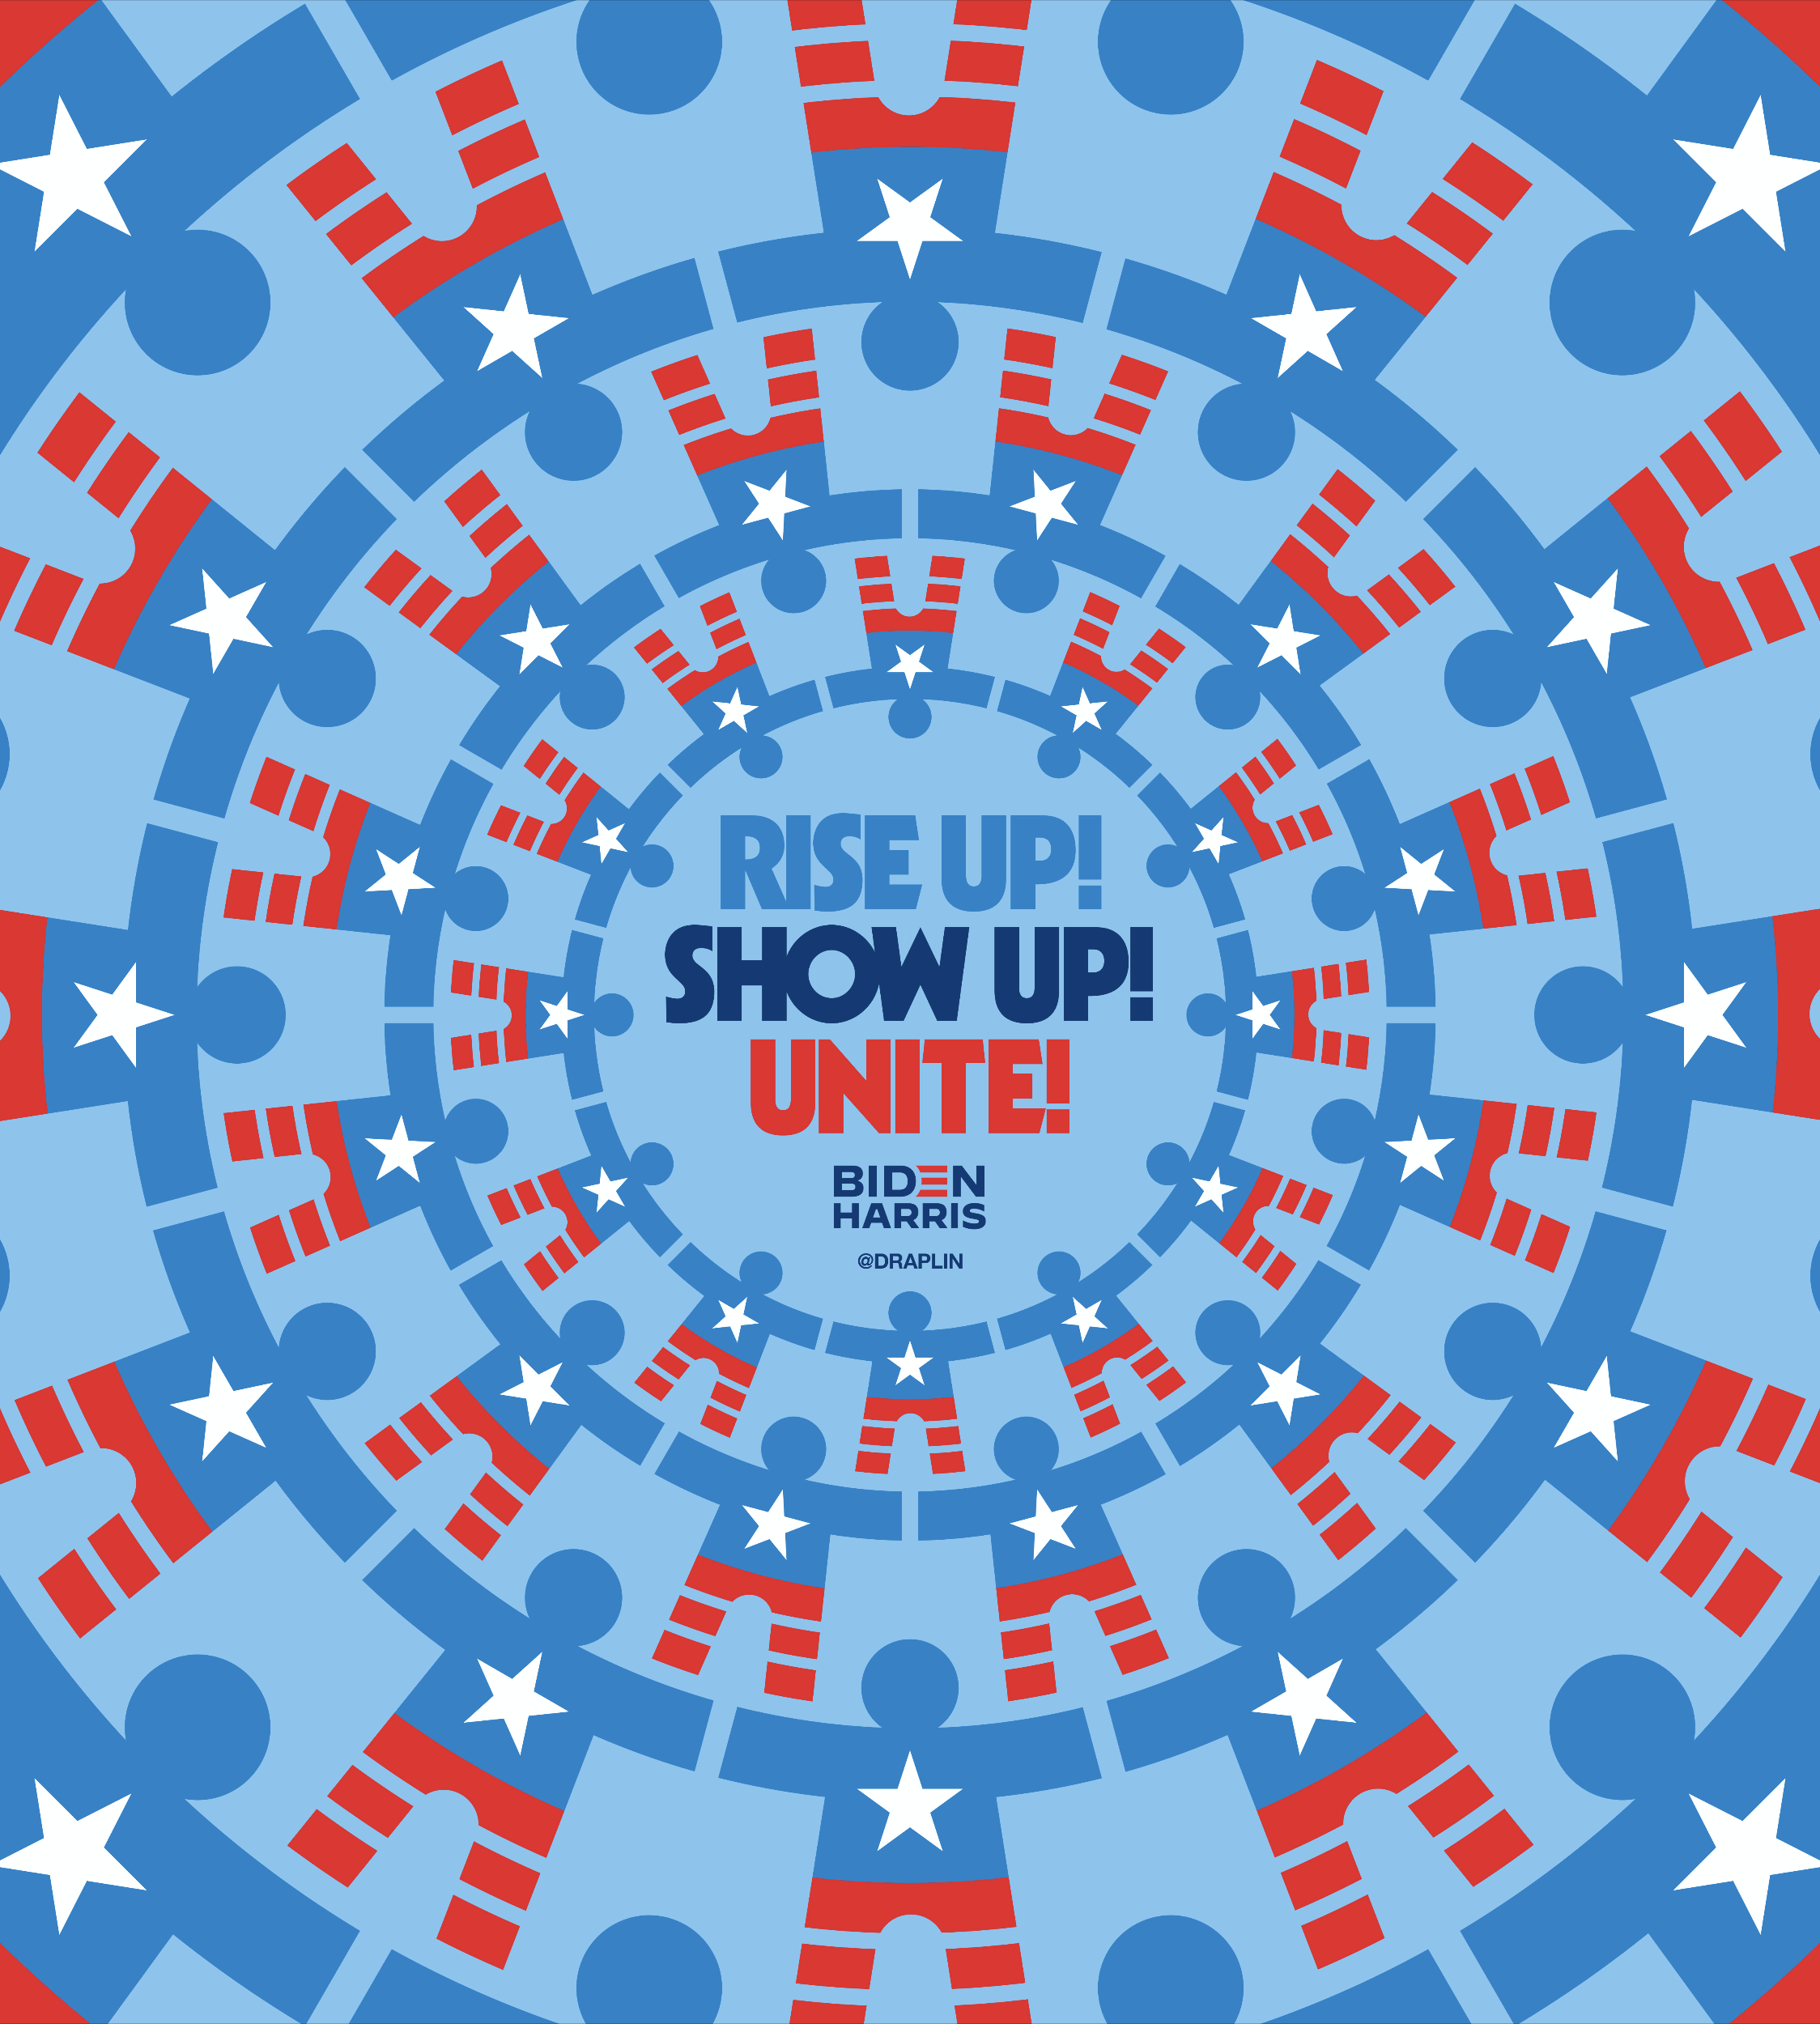 Lettering art of the phrase 'Rise up. Show up. Unite!' by Aaron Draplin